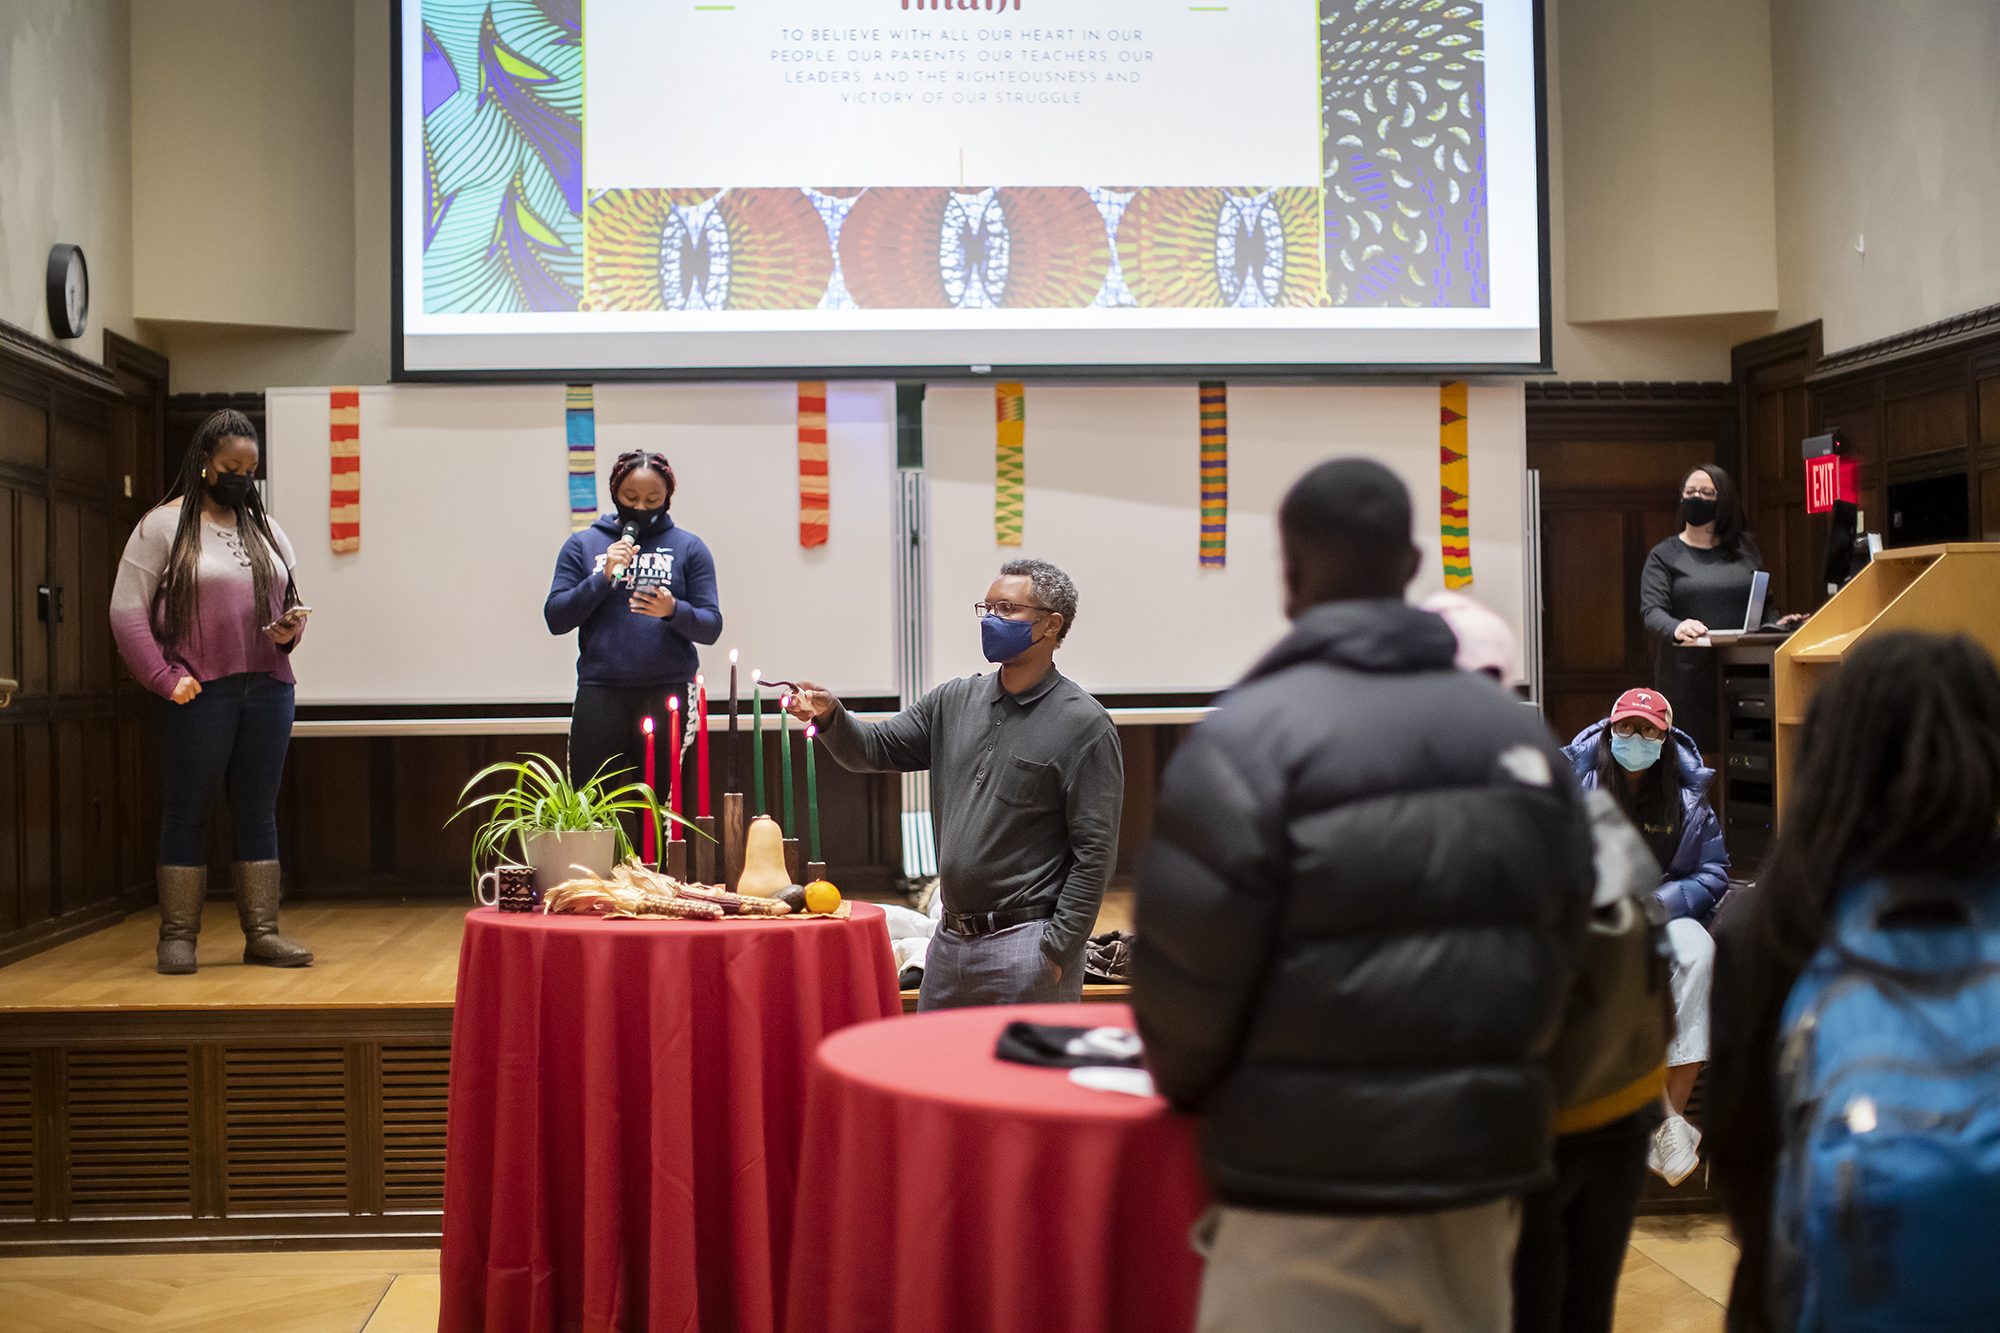 Students watch a man lighting seven red and green candles for Kwanzaa. The table also displays plants, squash, and maize in representation of the harvest festival